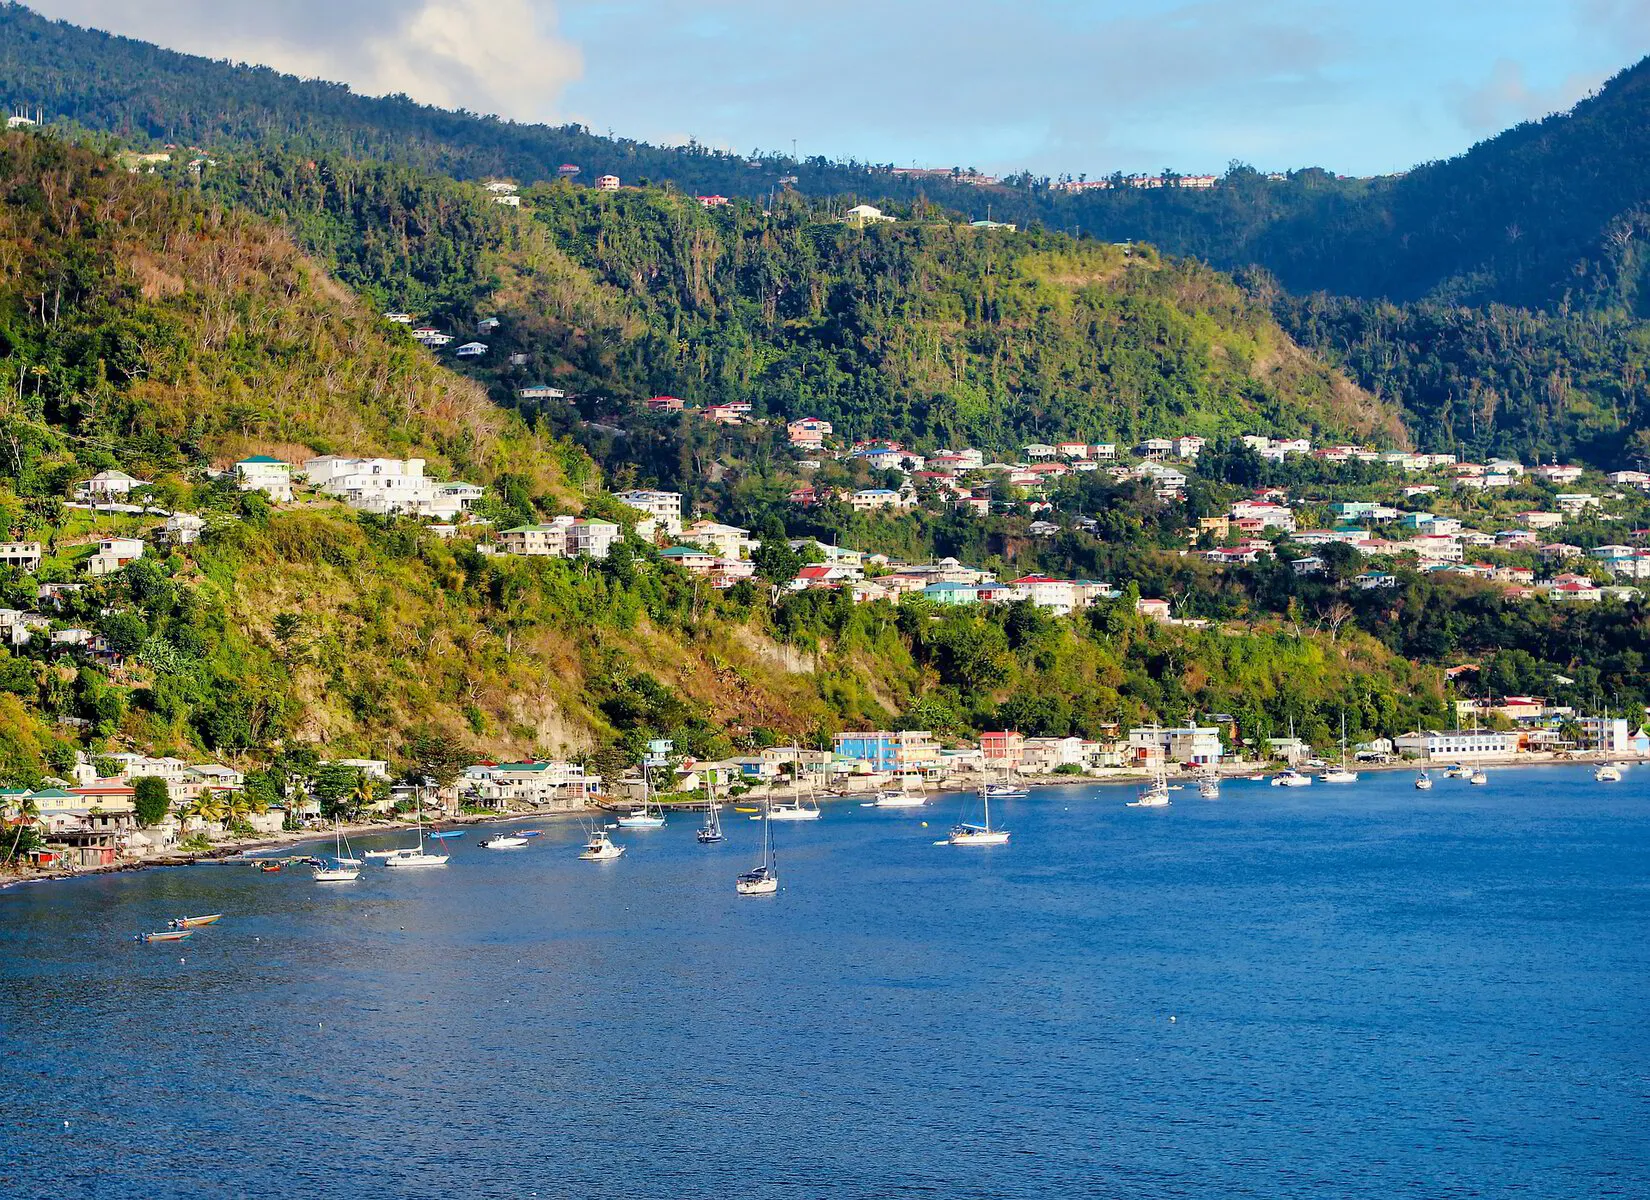 The private bank setup from Dominica